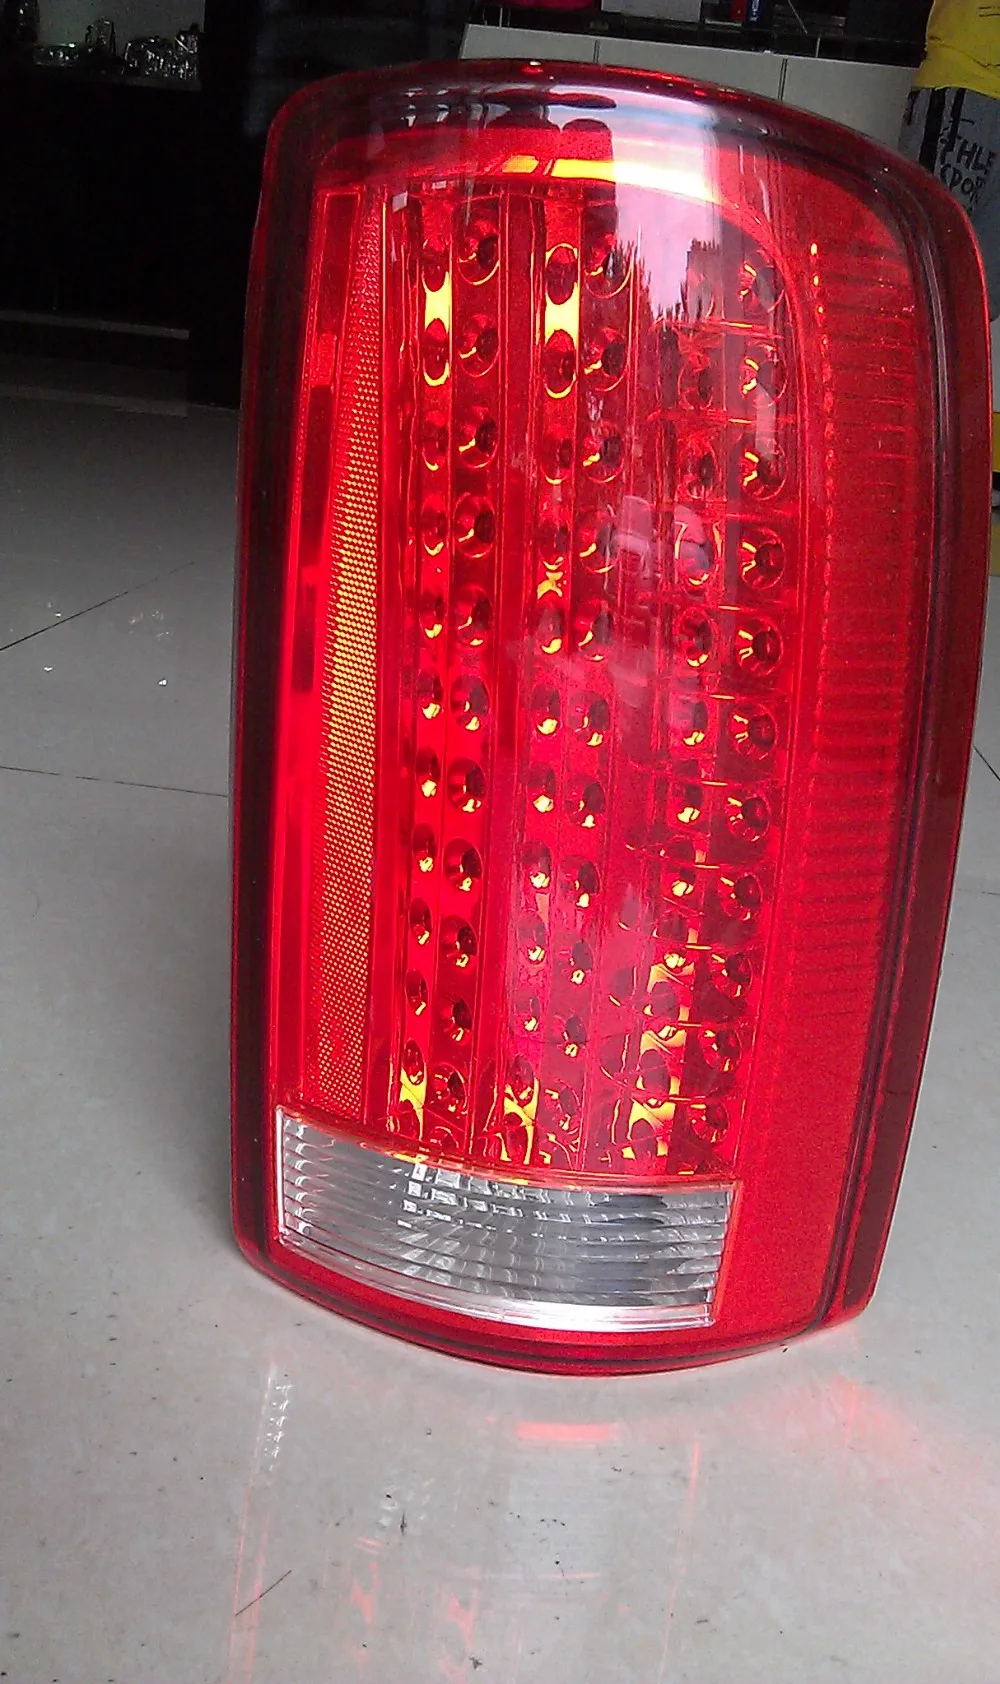 Vland Auto Car Lights For 2000 2003 2004 2005 2006 2007 GMC LED Tail Lamp Factory Wholesale Car Accessory Tail Light